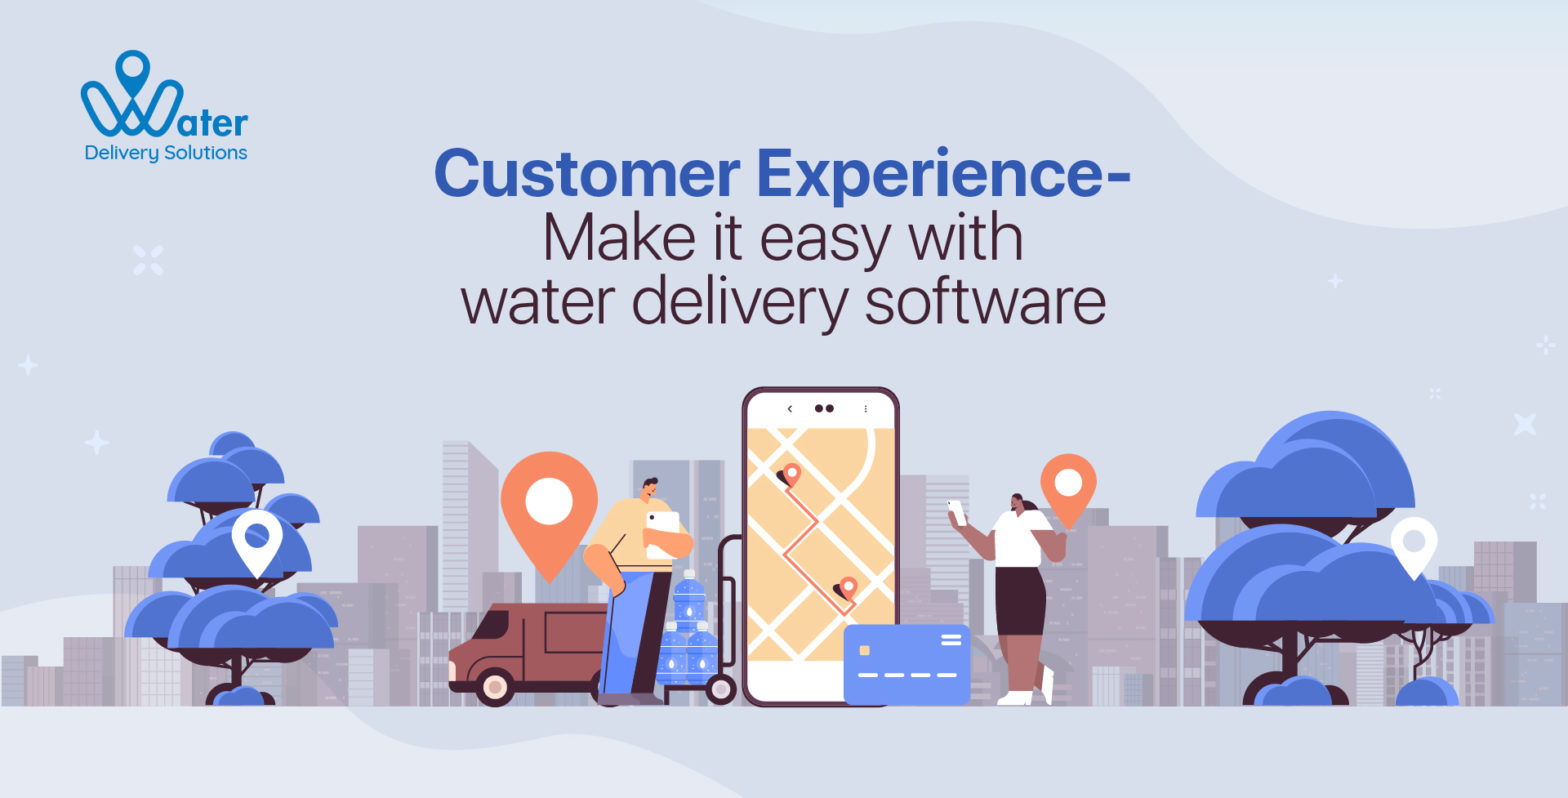 ravi garg, wds, customer experience, water delivery software, delivery system